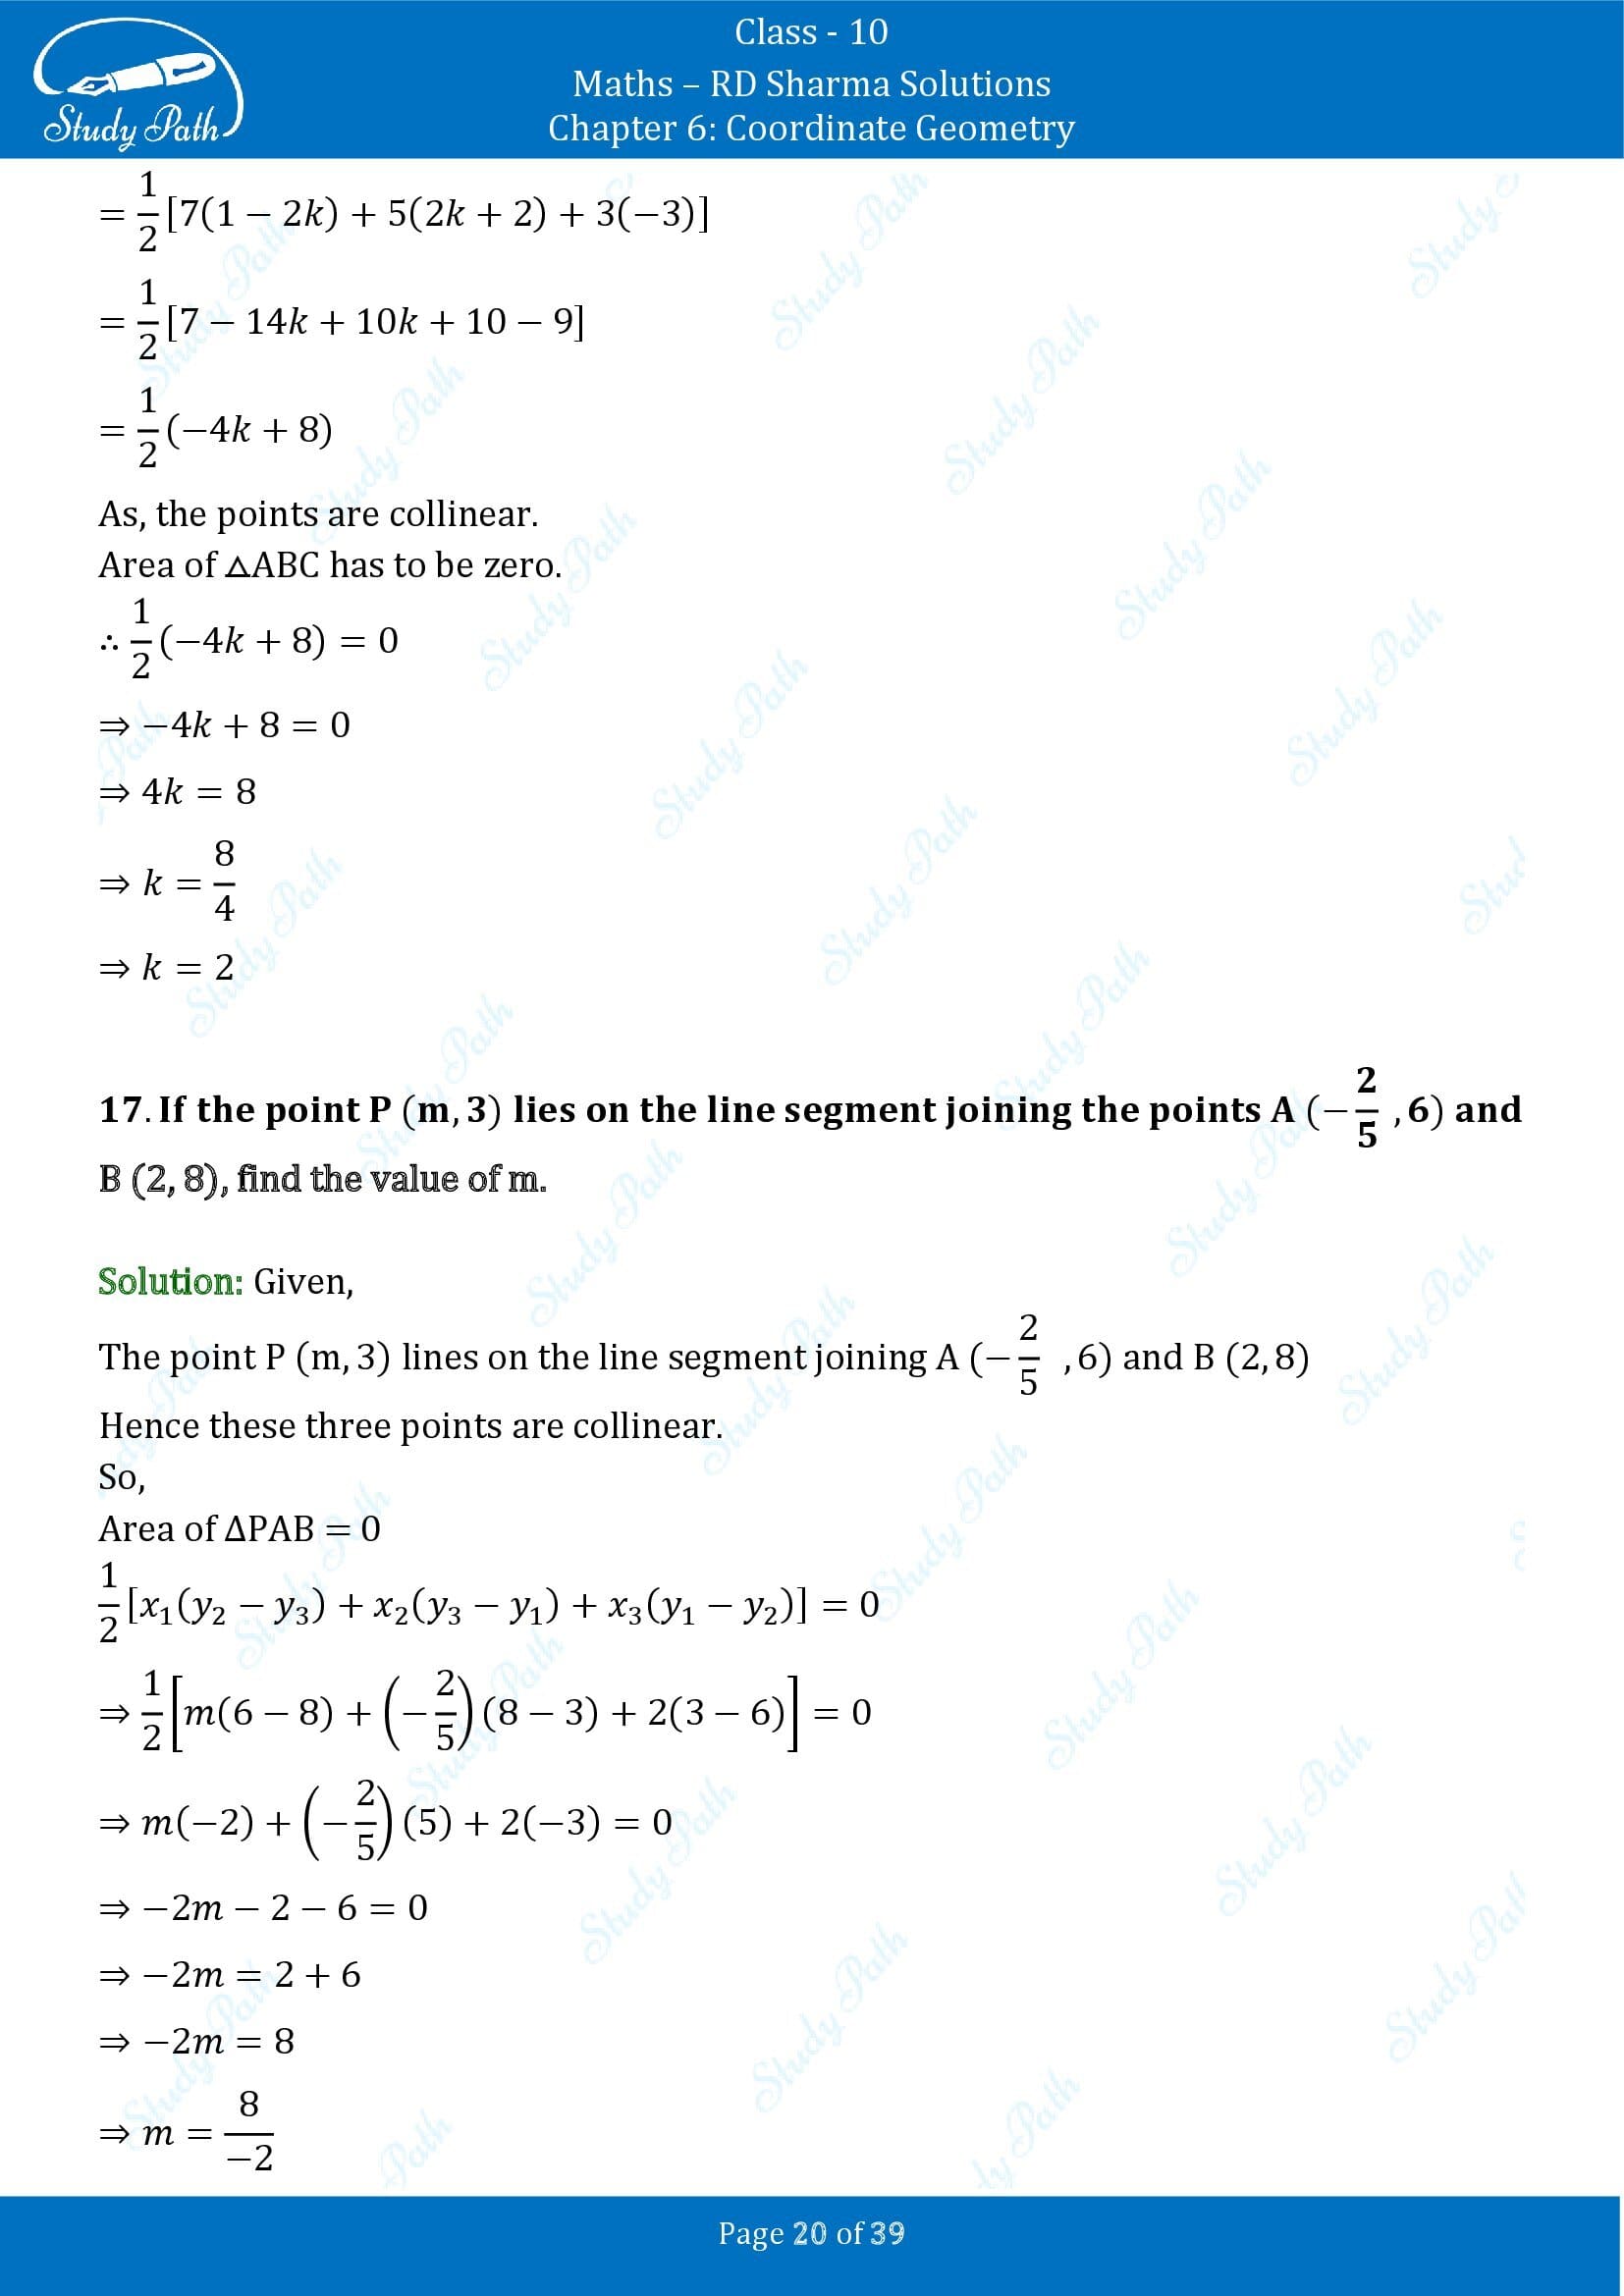 RD Sharma Solutions Class 10 Chapter 6 Coordinate Geometry Exercise 6.5 0020